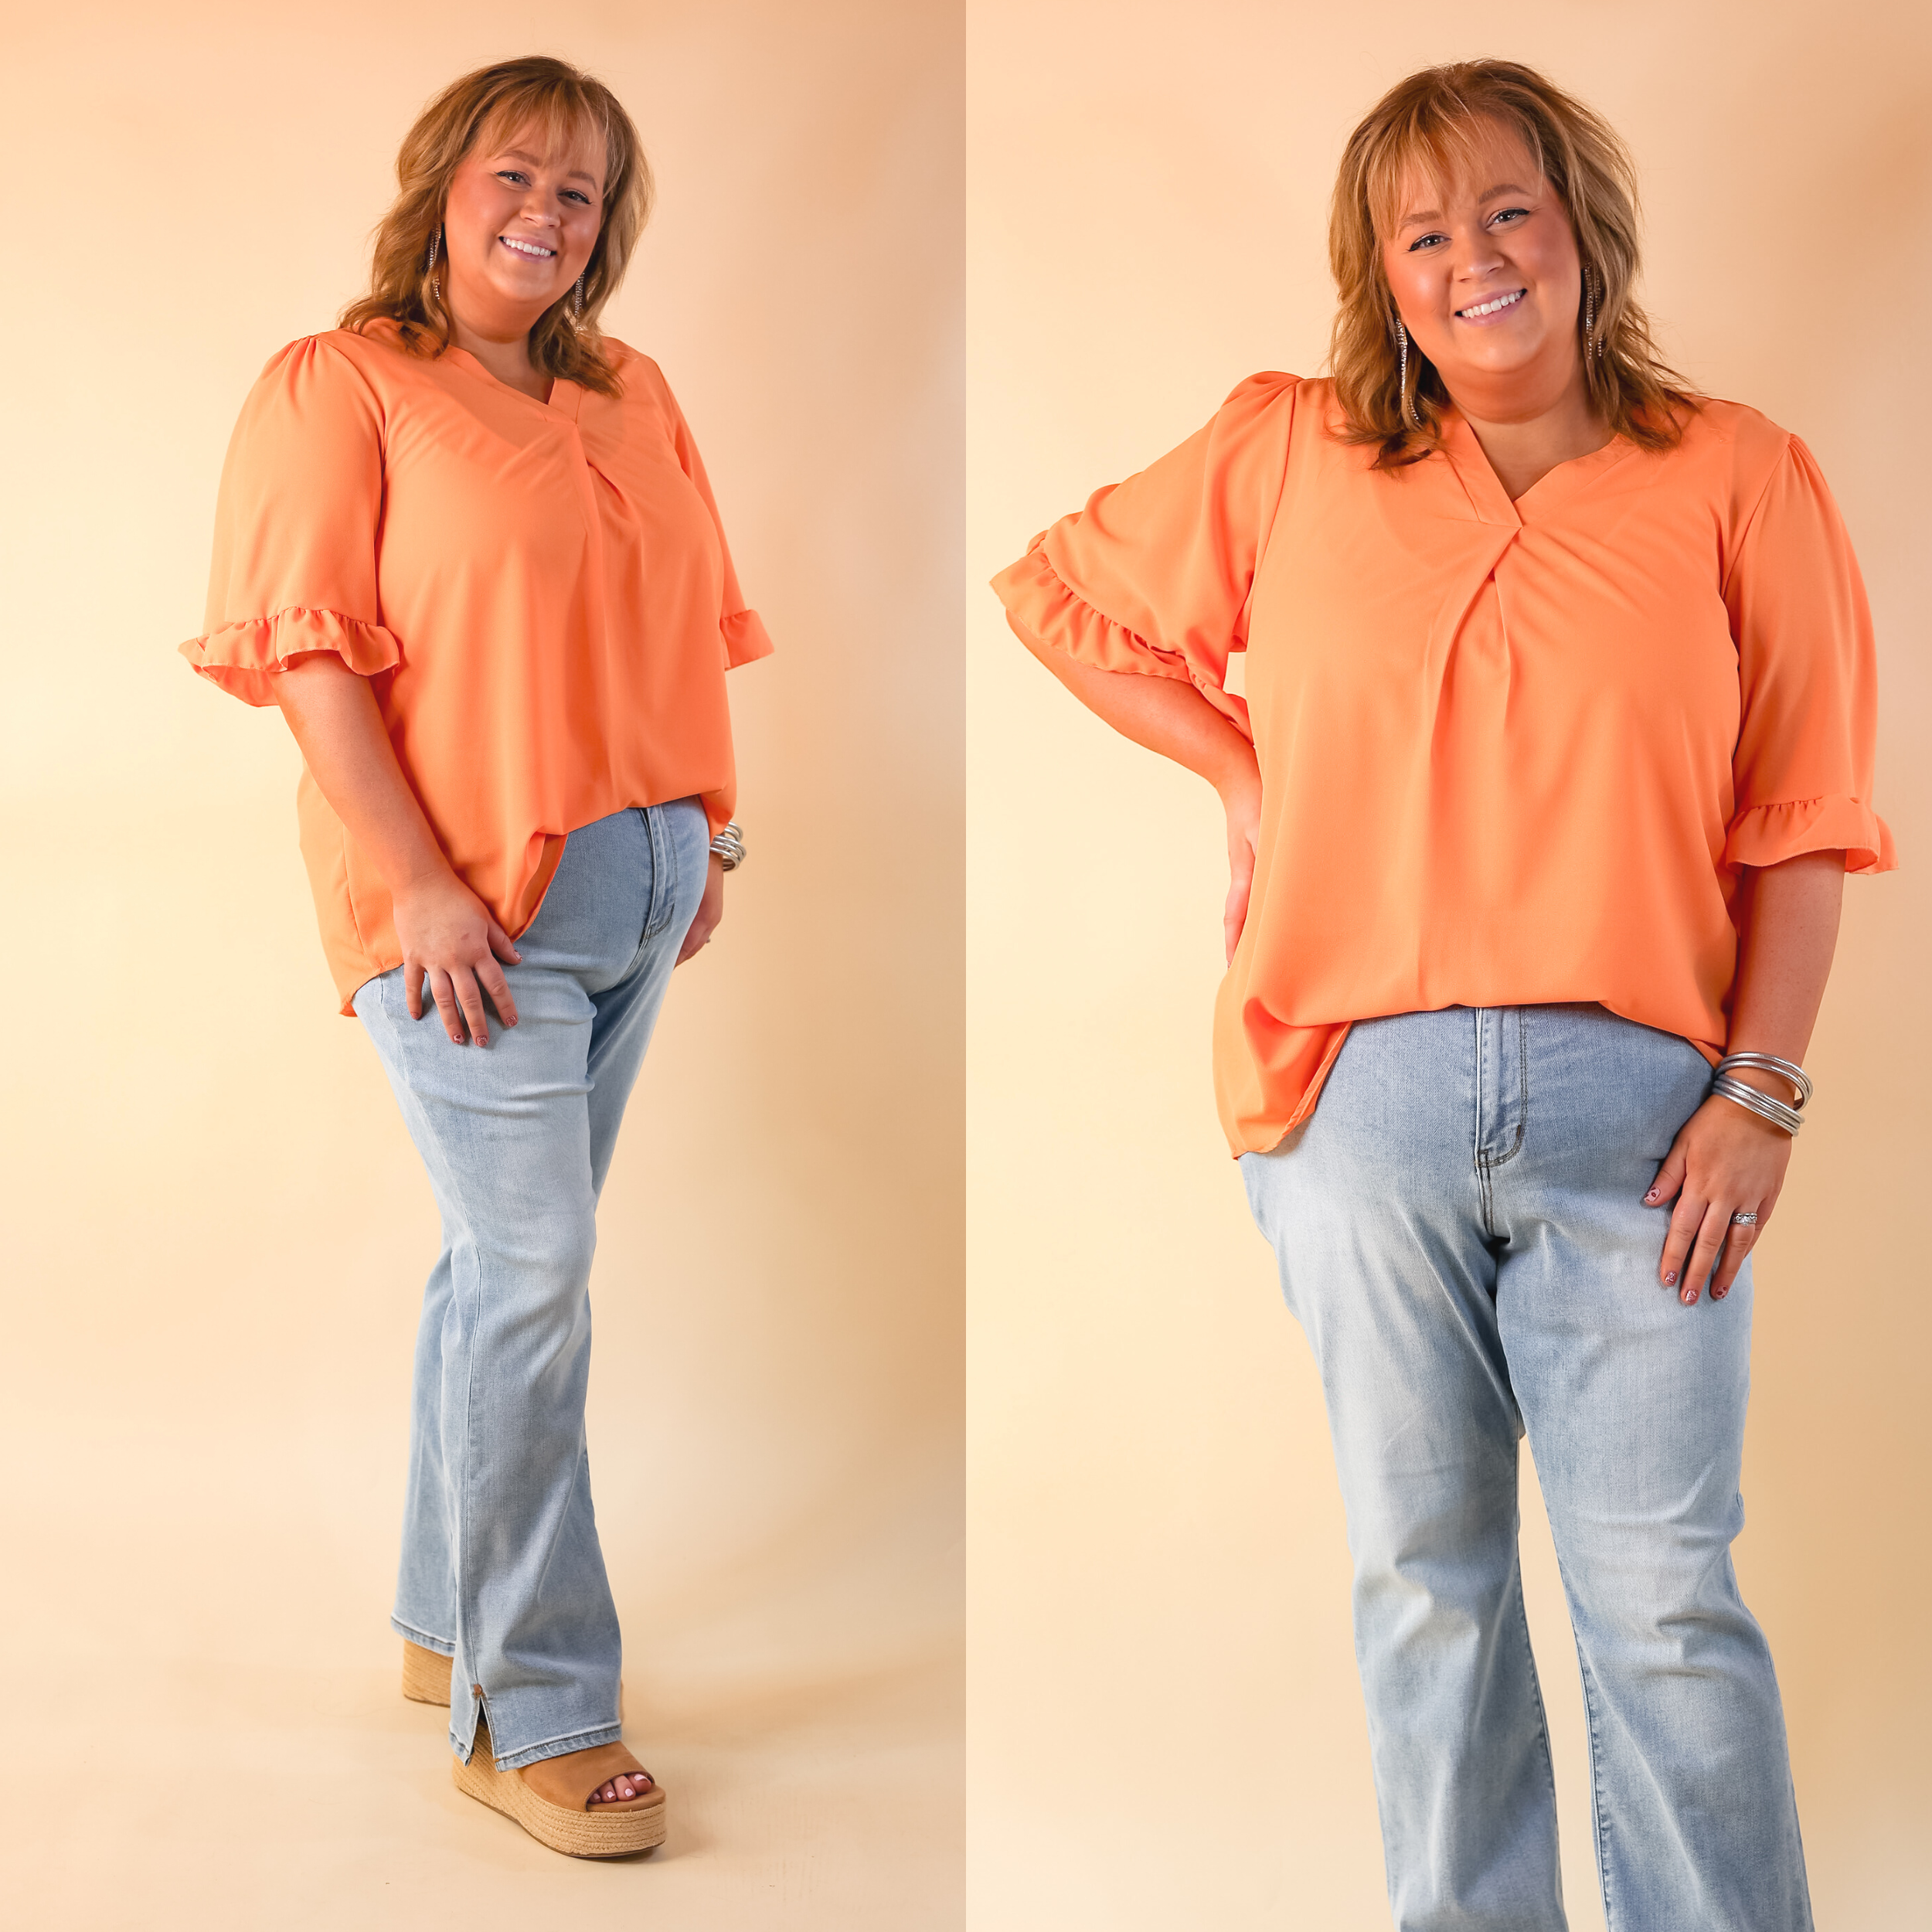 Radiant Ways Ruffle Short Sleeve Top with V Neckline in Orange - Giddy Up Glamour Boutique